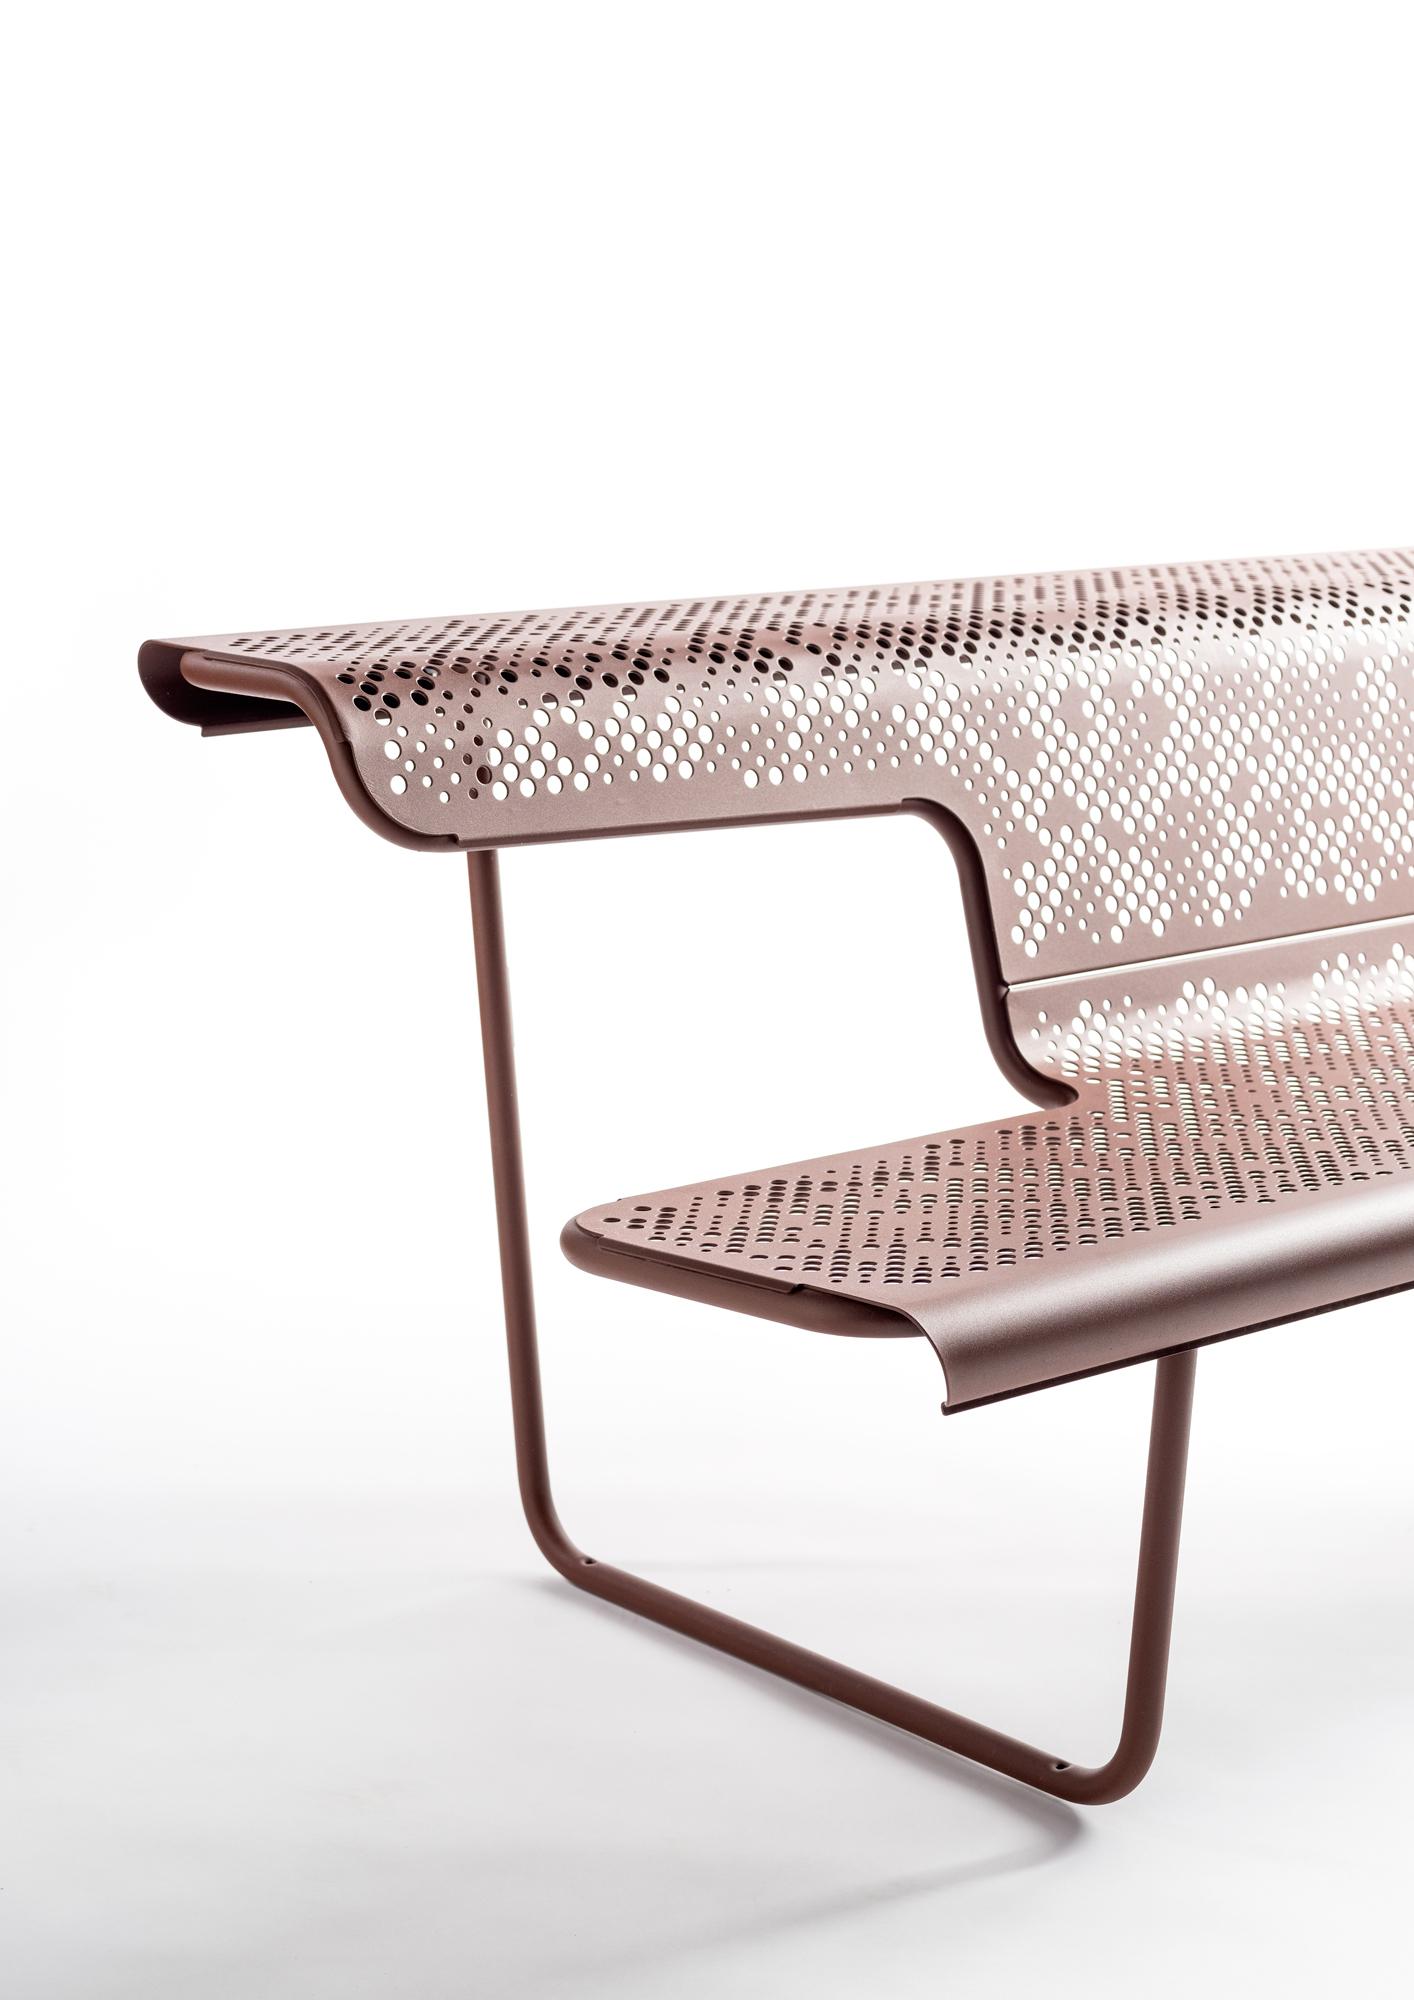 Modern Public bench in perforated steel designed by Alfredo Häberli model 